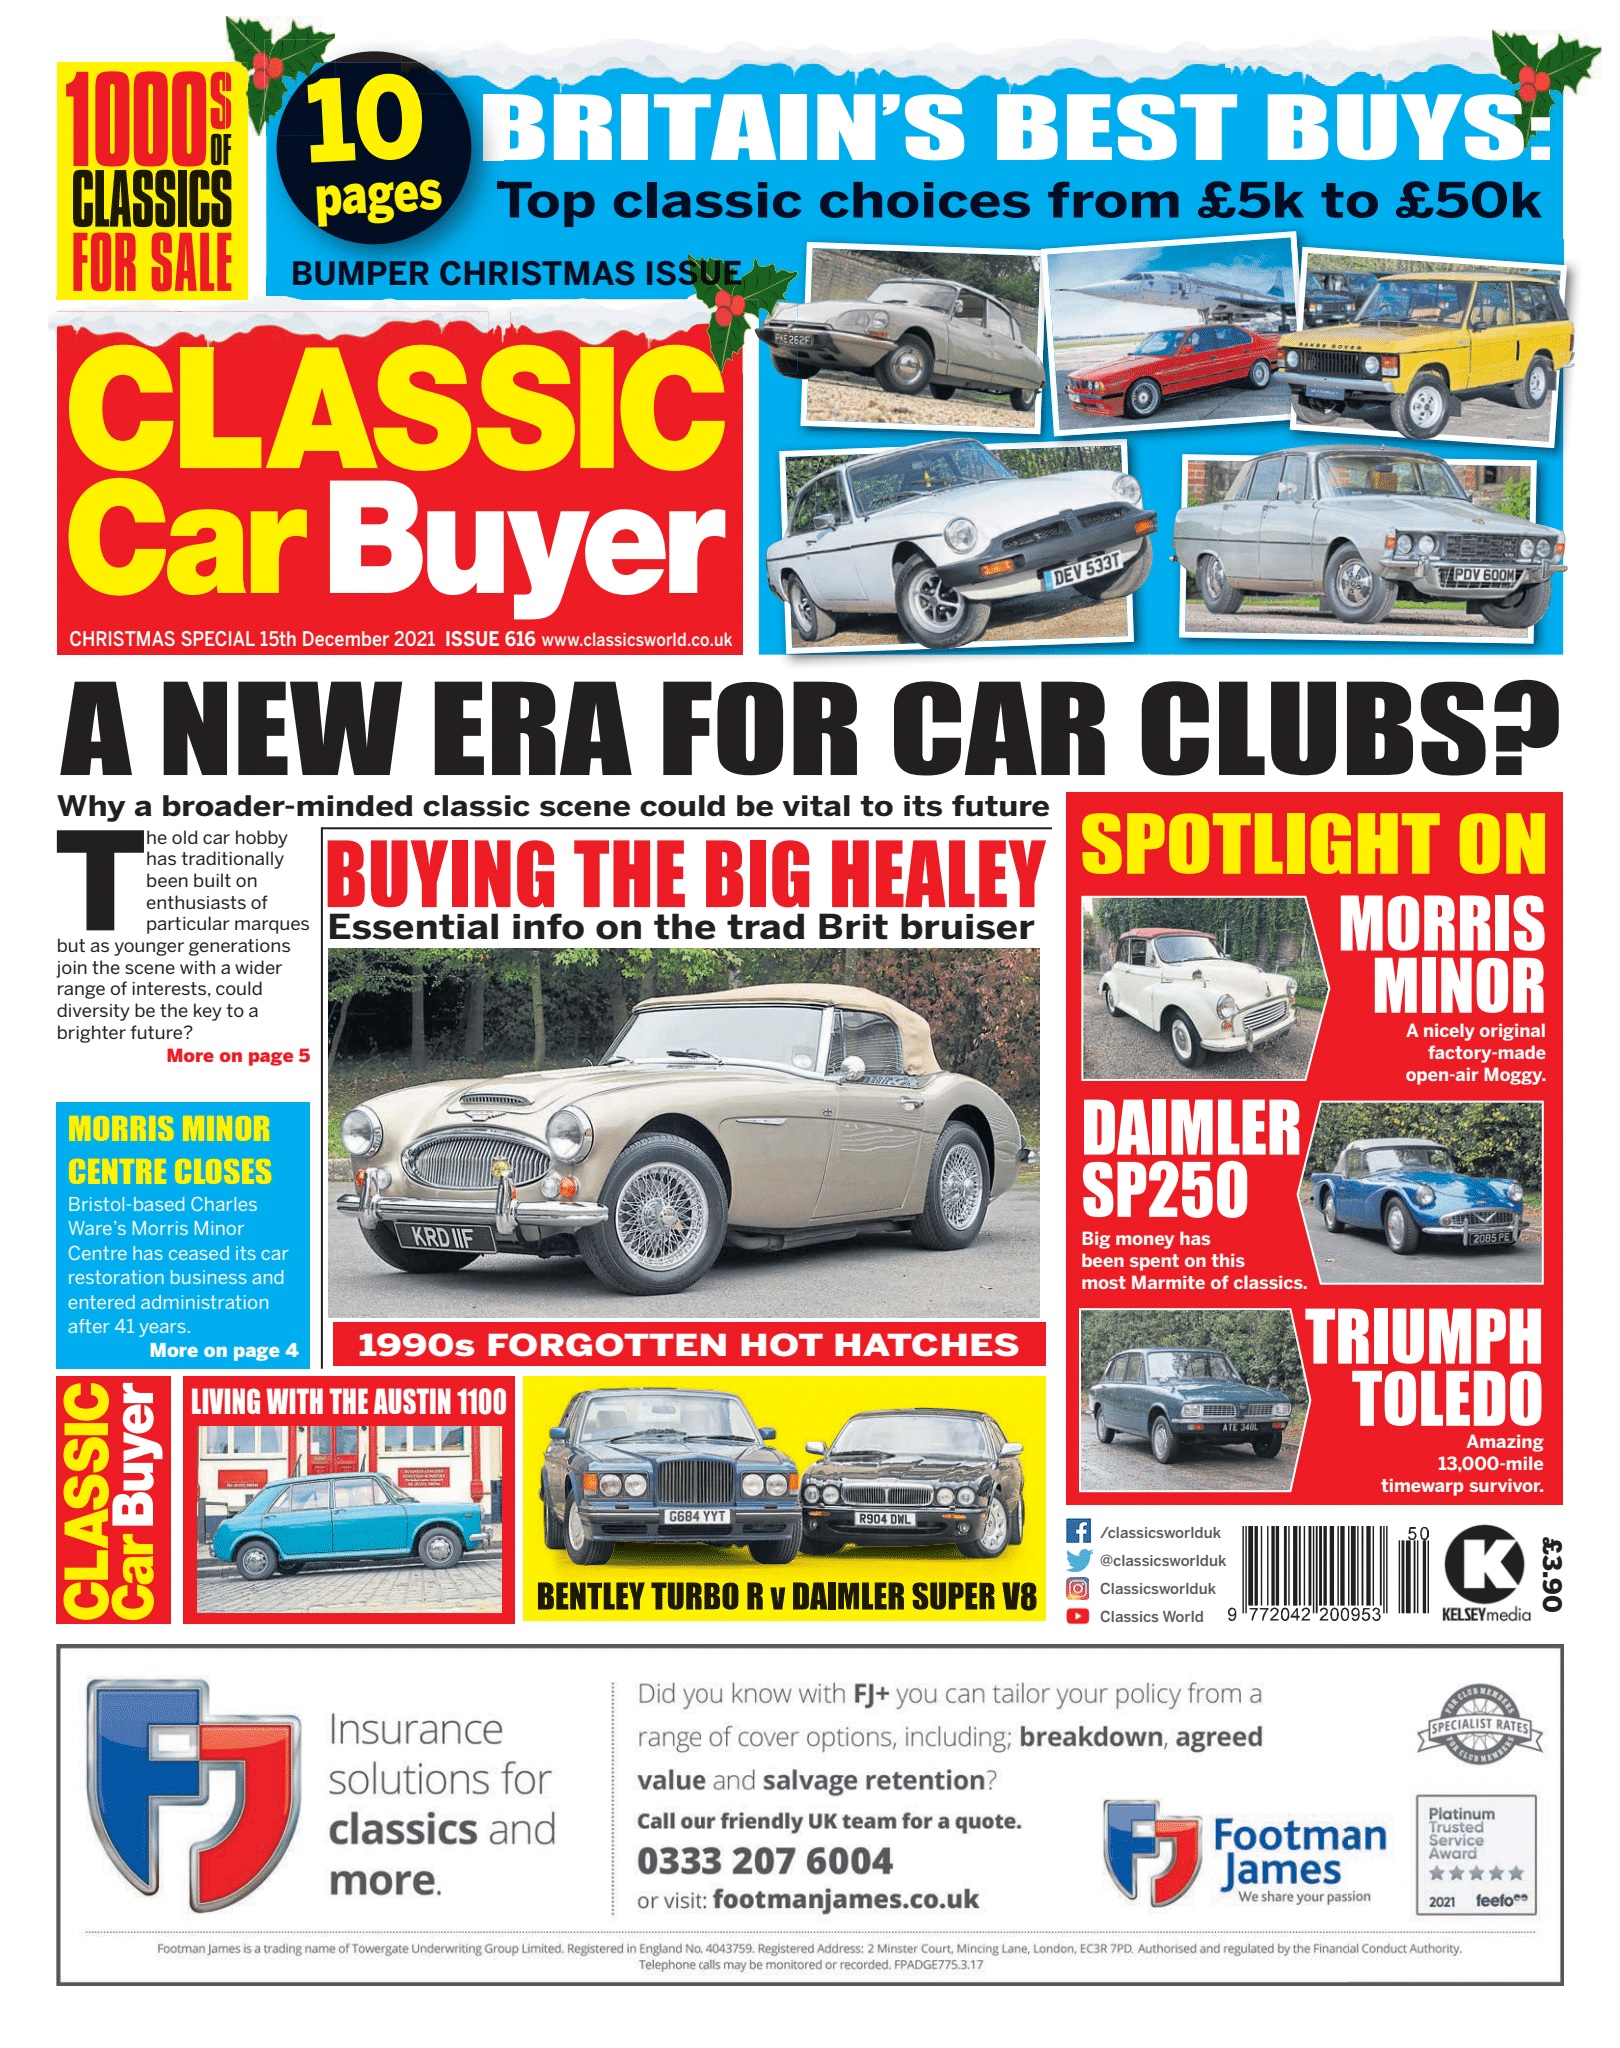 Classic Car Buyer #616 15th December 2021 - Christmas Special